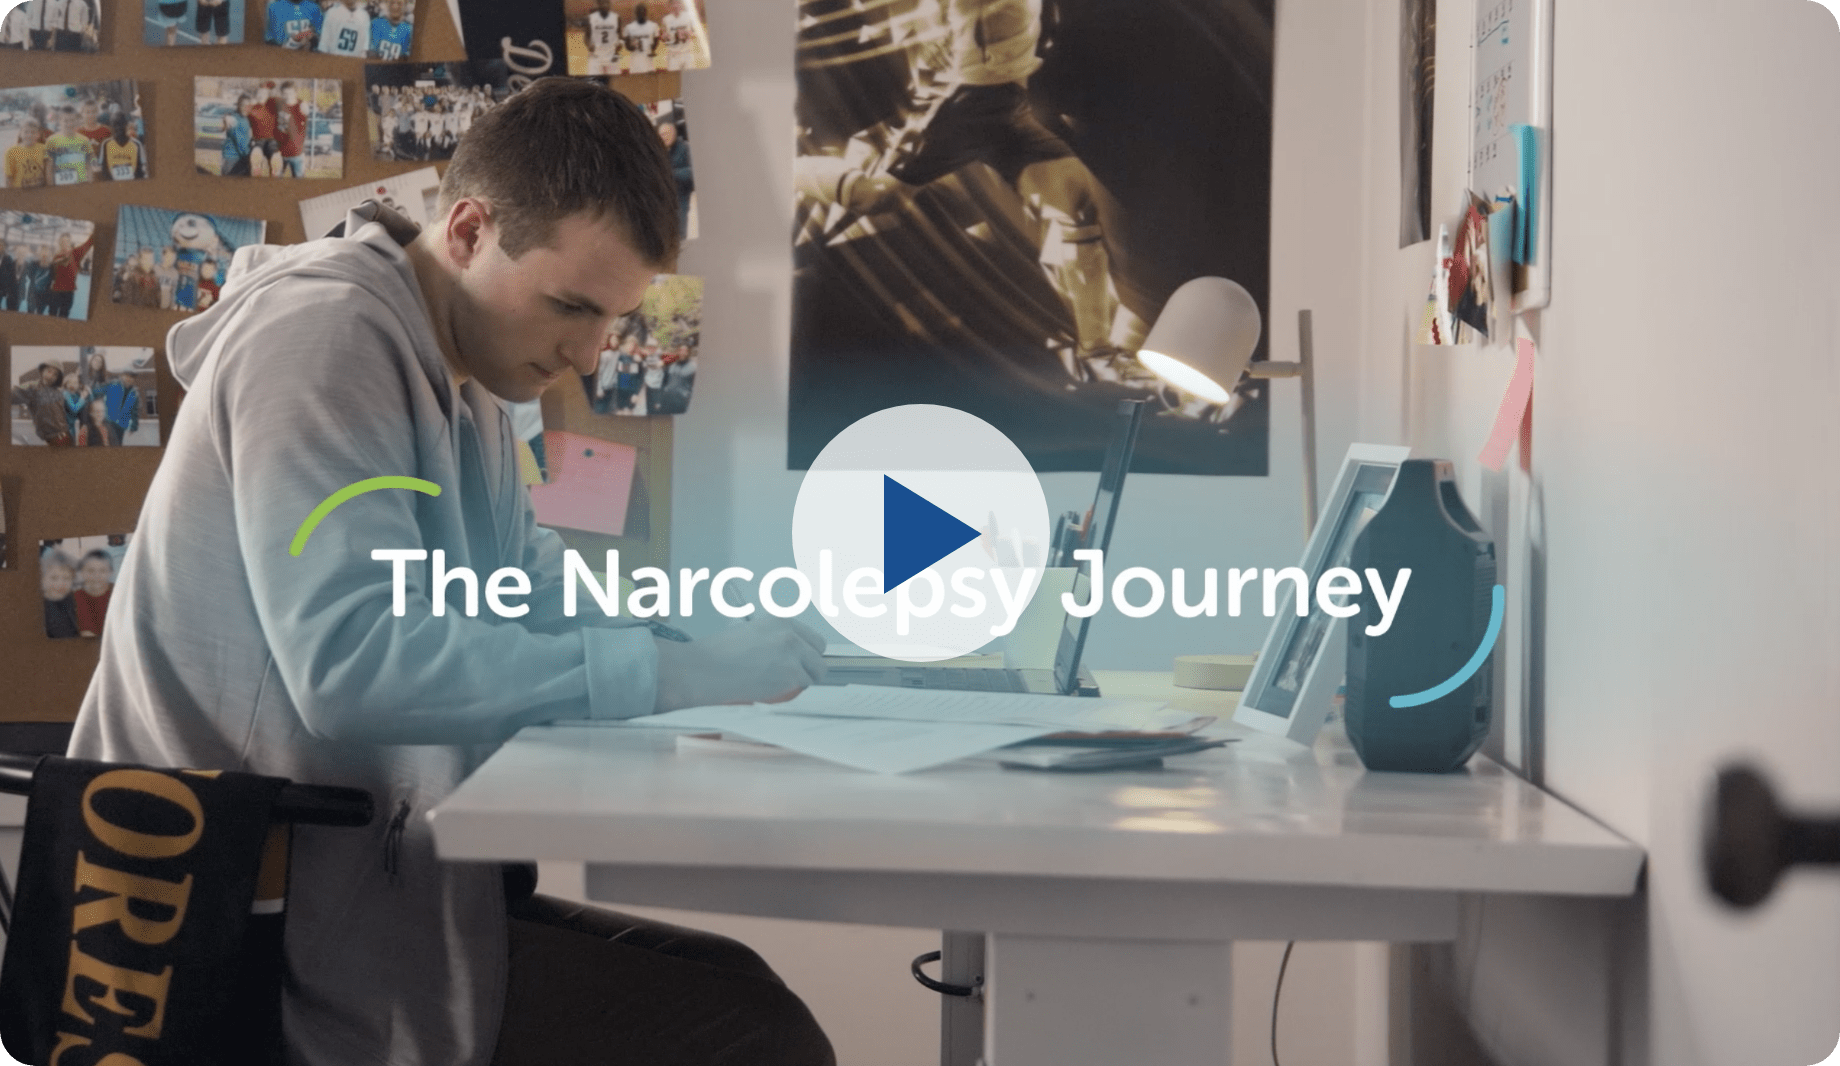 Watch a video on their narcolepsy journey